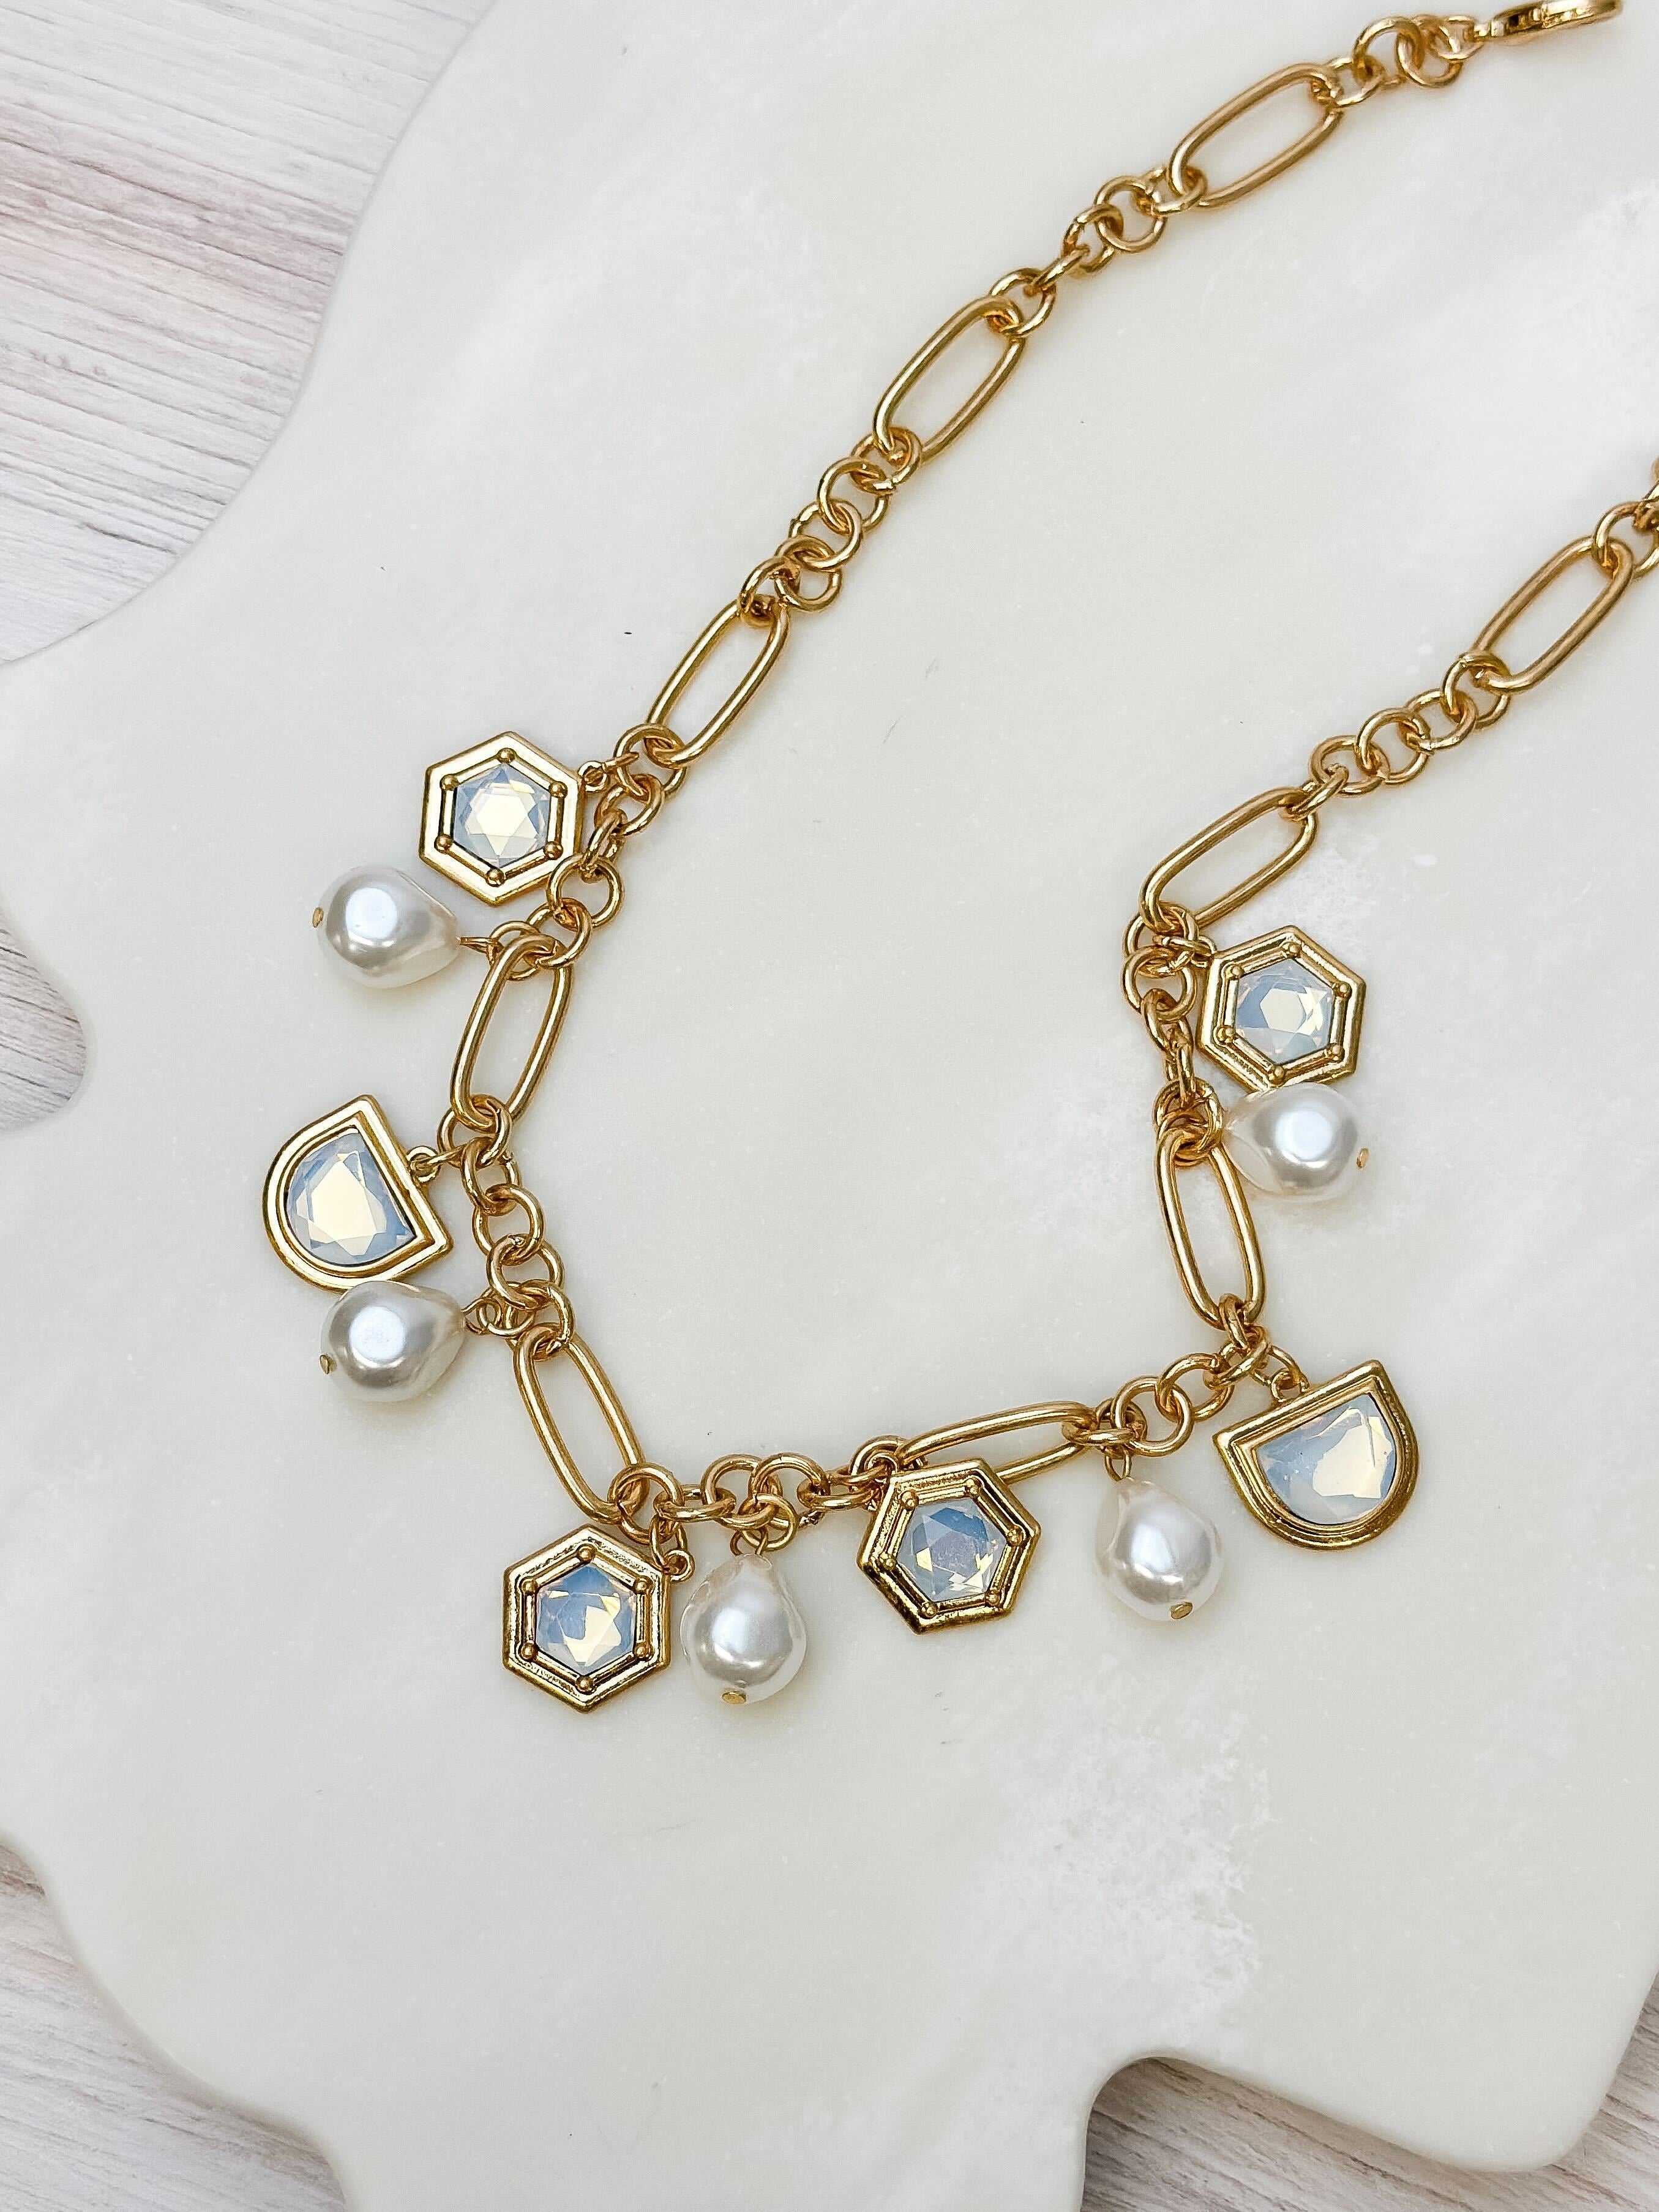 Pearl & Iridescent Stone Charm Necklace - Opal